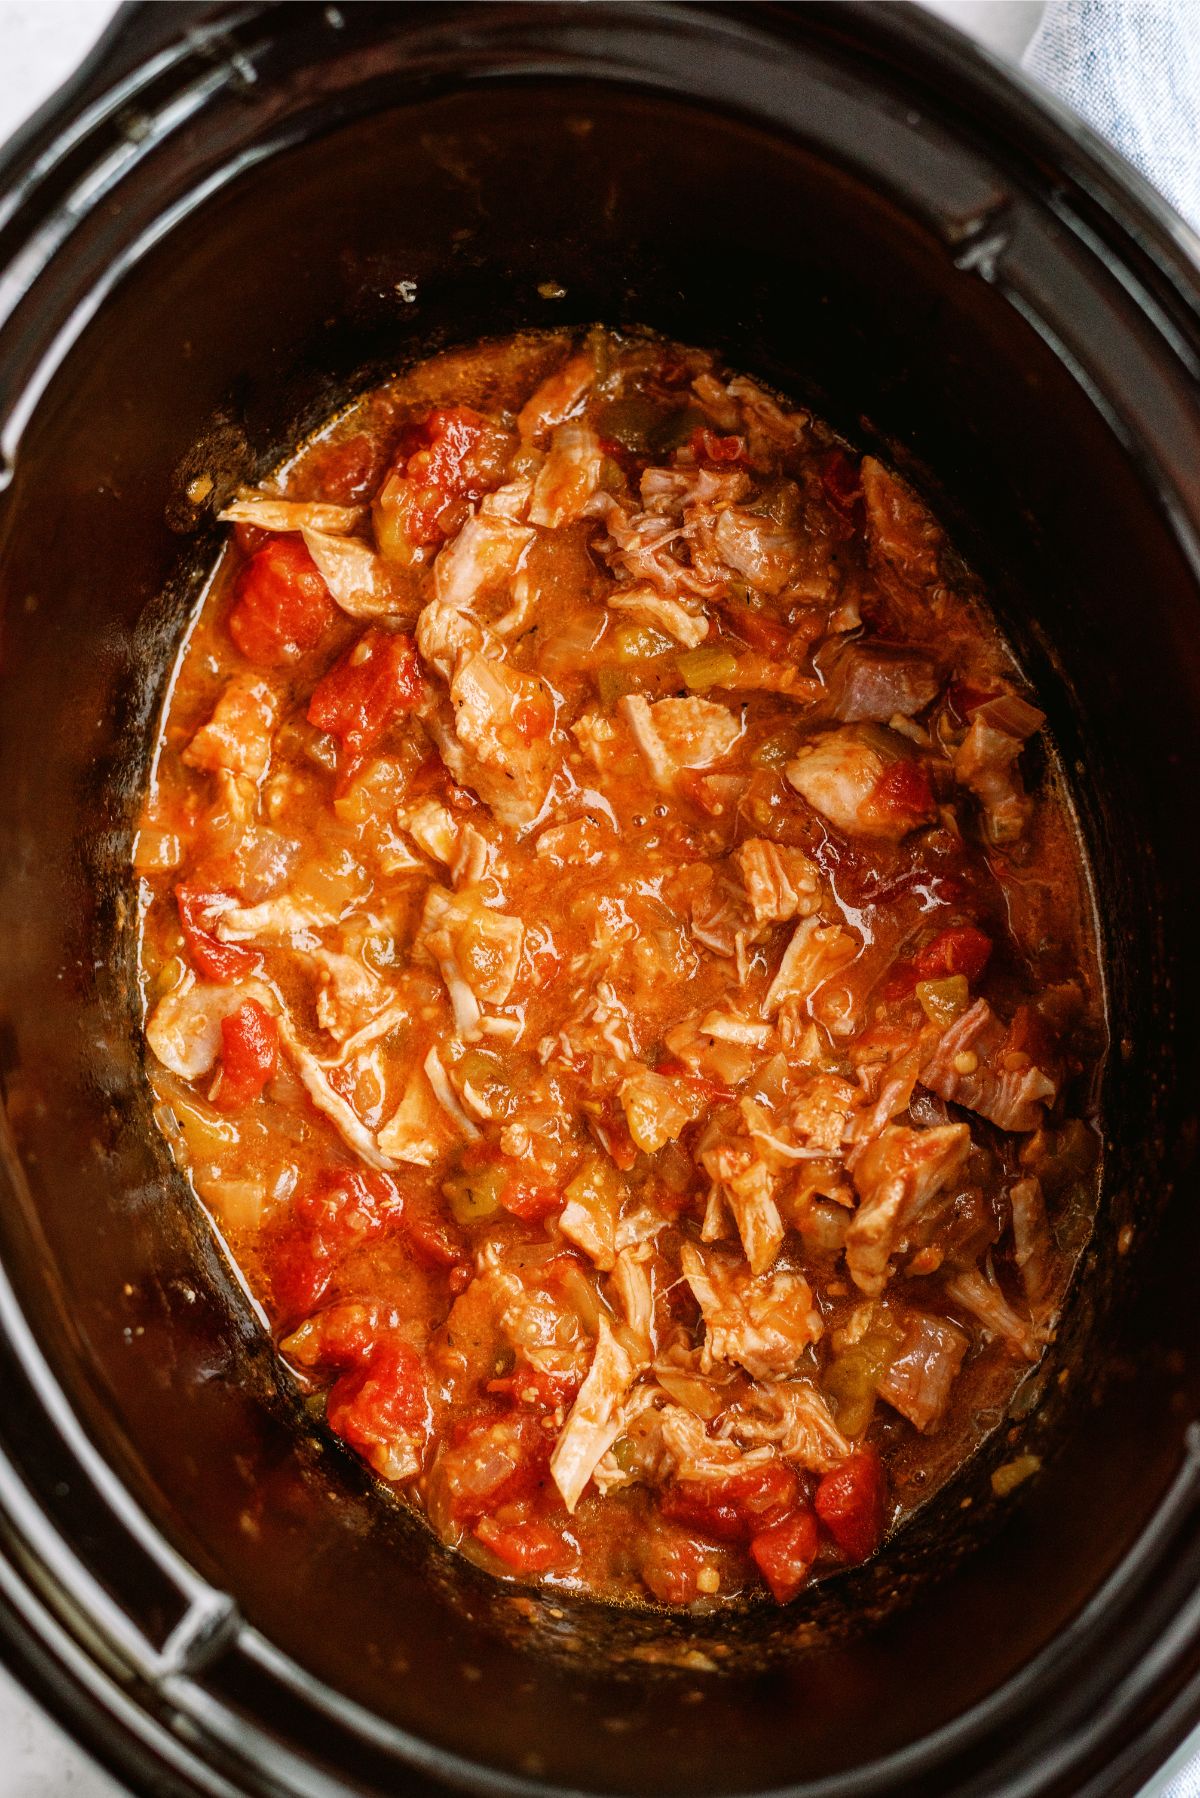 Cooked and shredded pork in the slow cooker